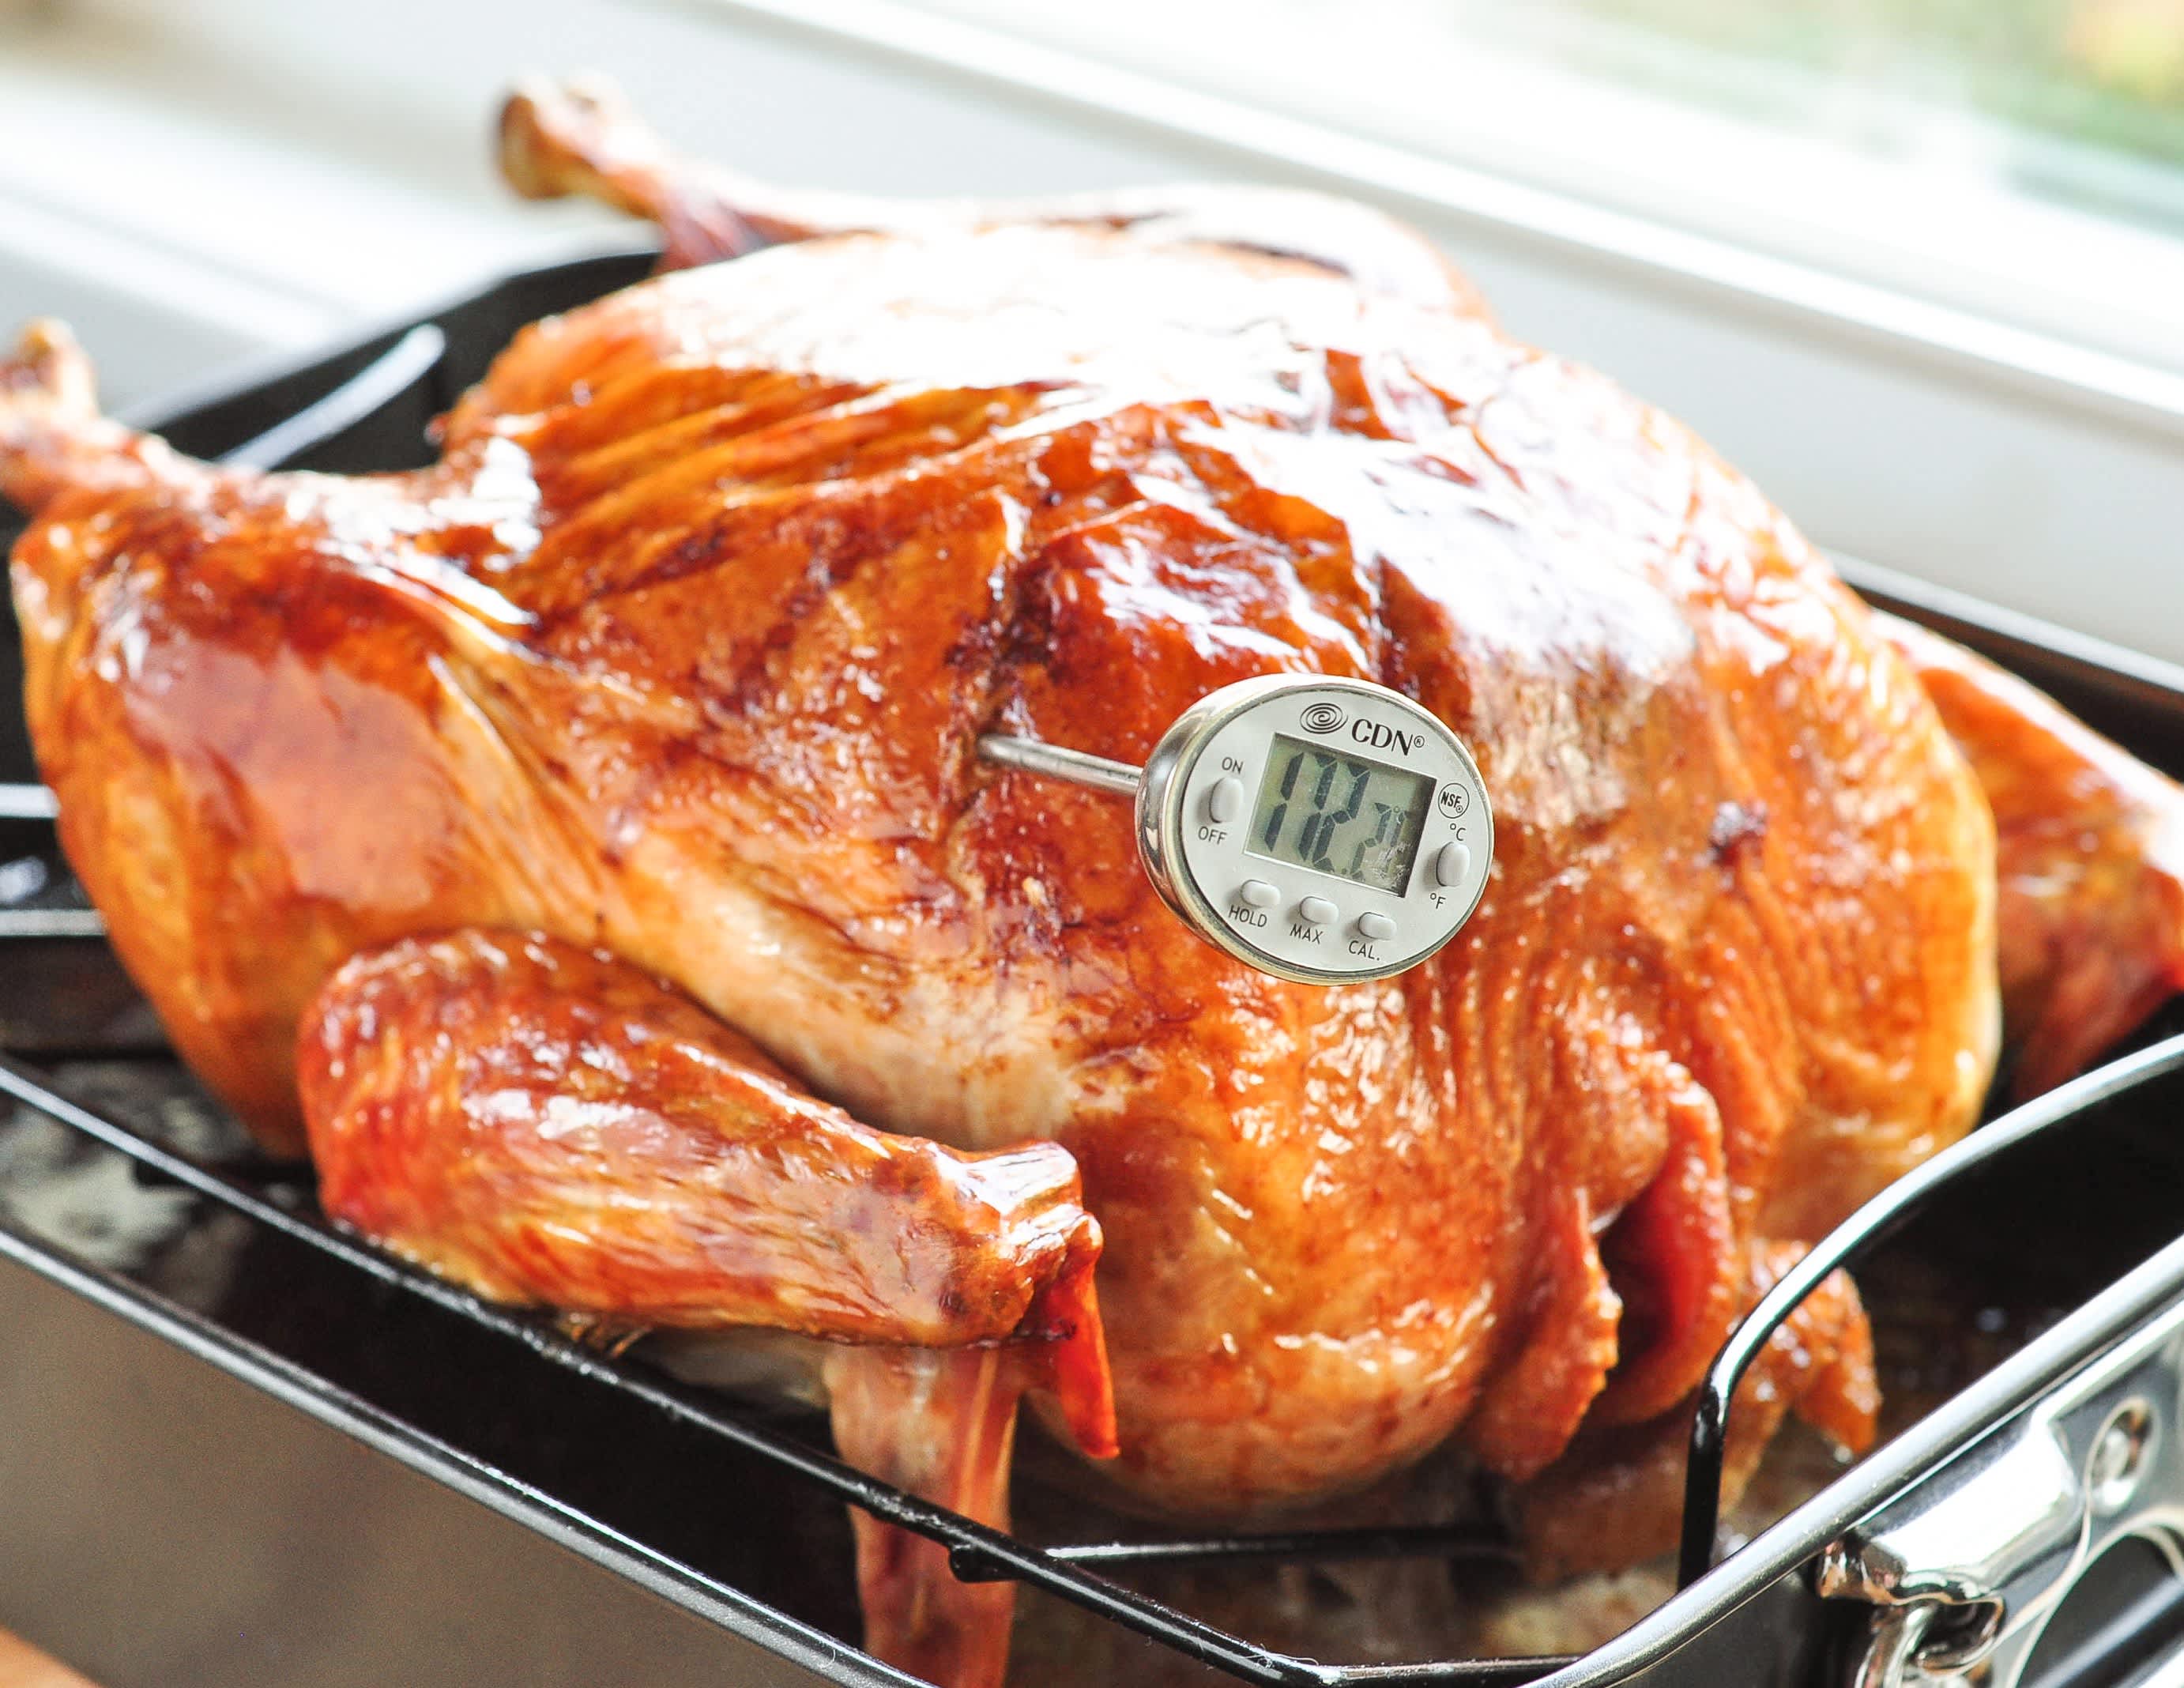 How to Take a Turkey's Temperature Video and Steps